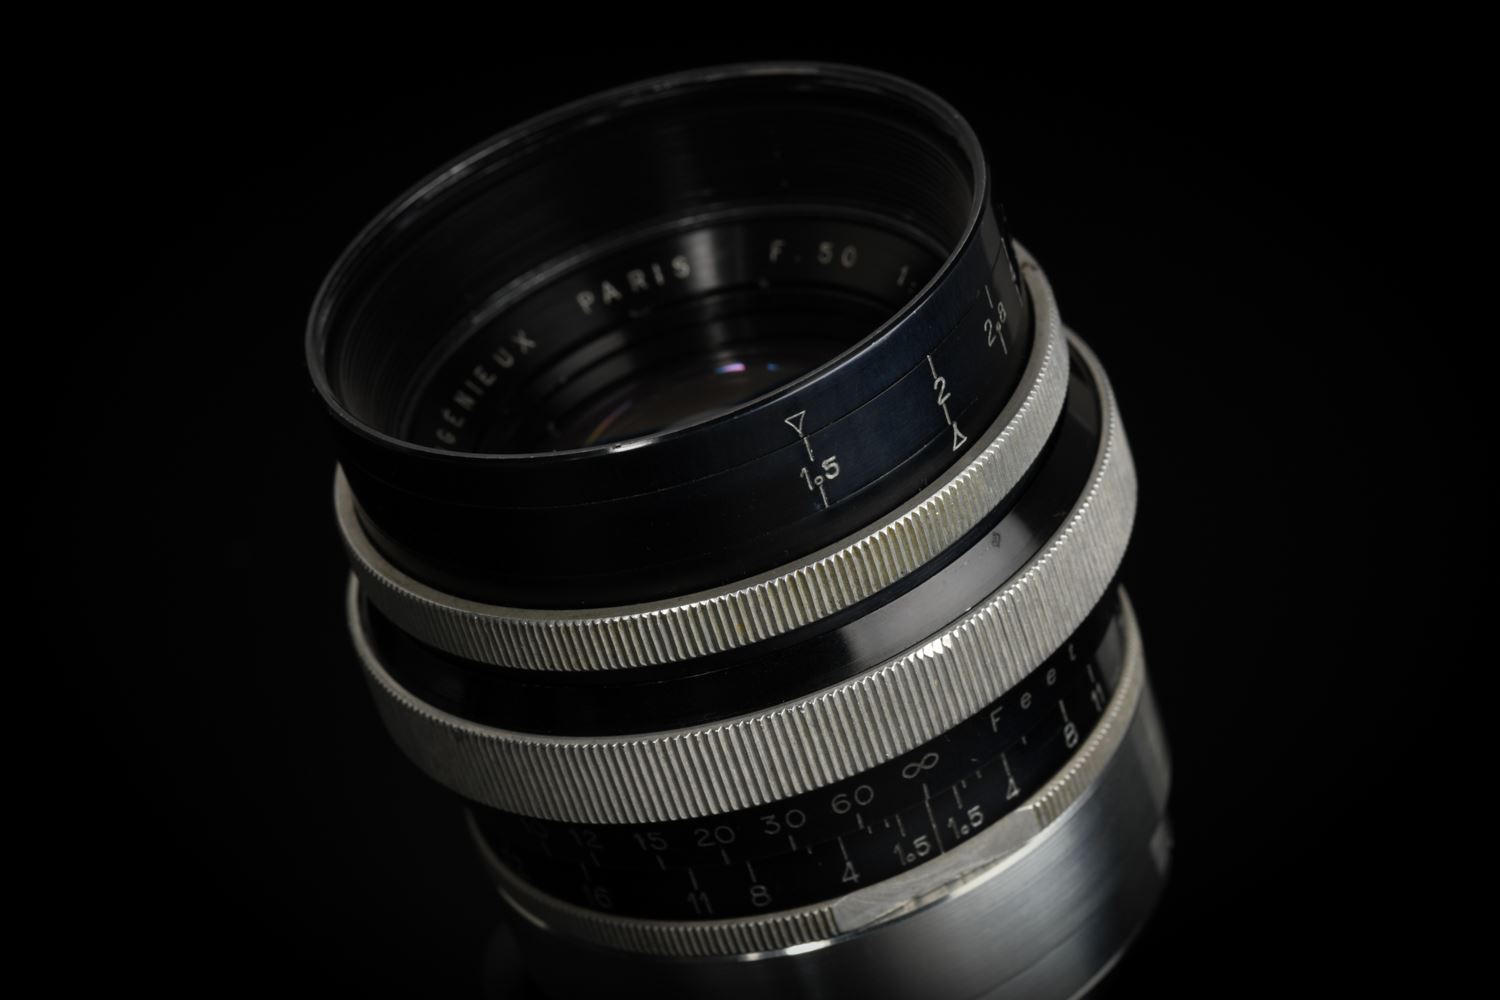 Picture of Angenieux Type S21 50mm f/1.5 Modified to Leica M